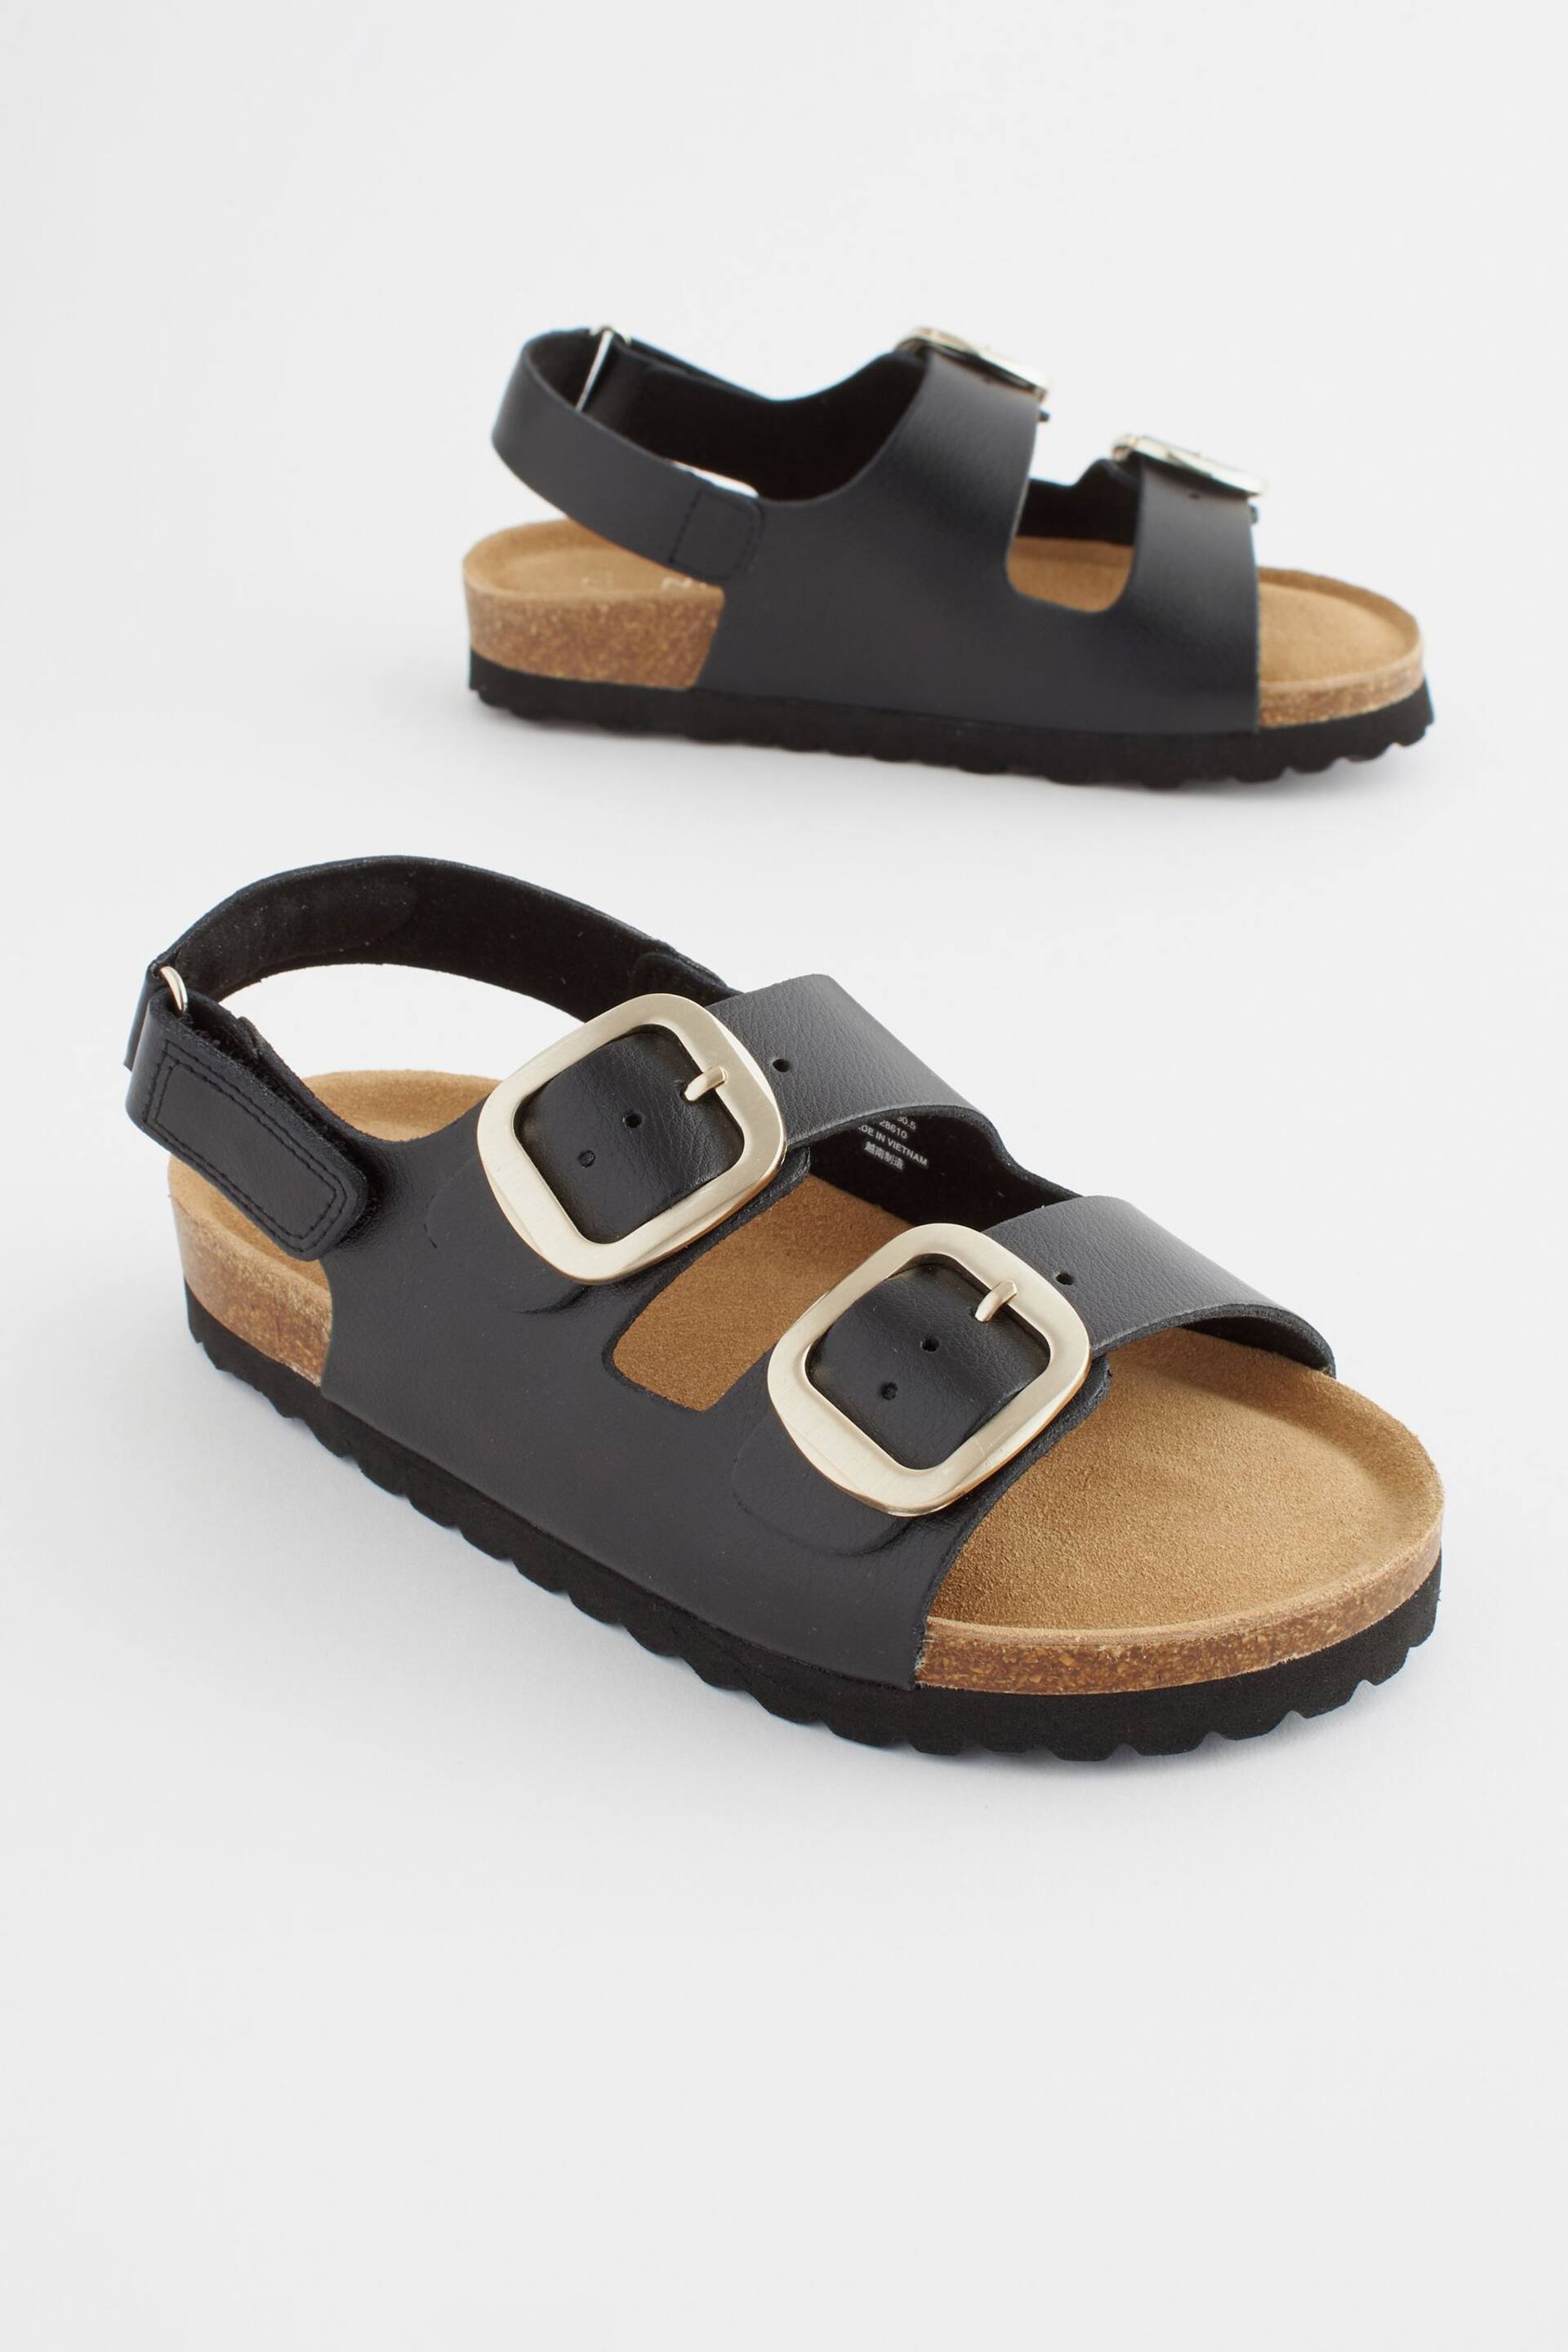 Black Leather Wide Fit (G) Two Strap Corkbed Sandals - Image 1 of 8